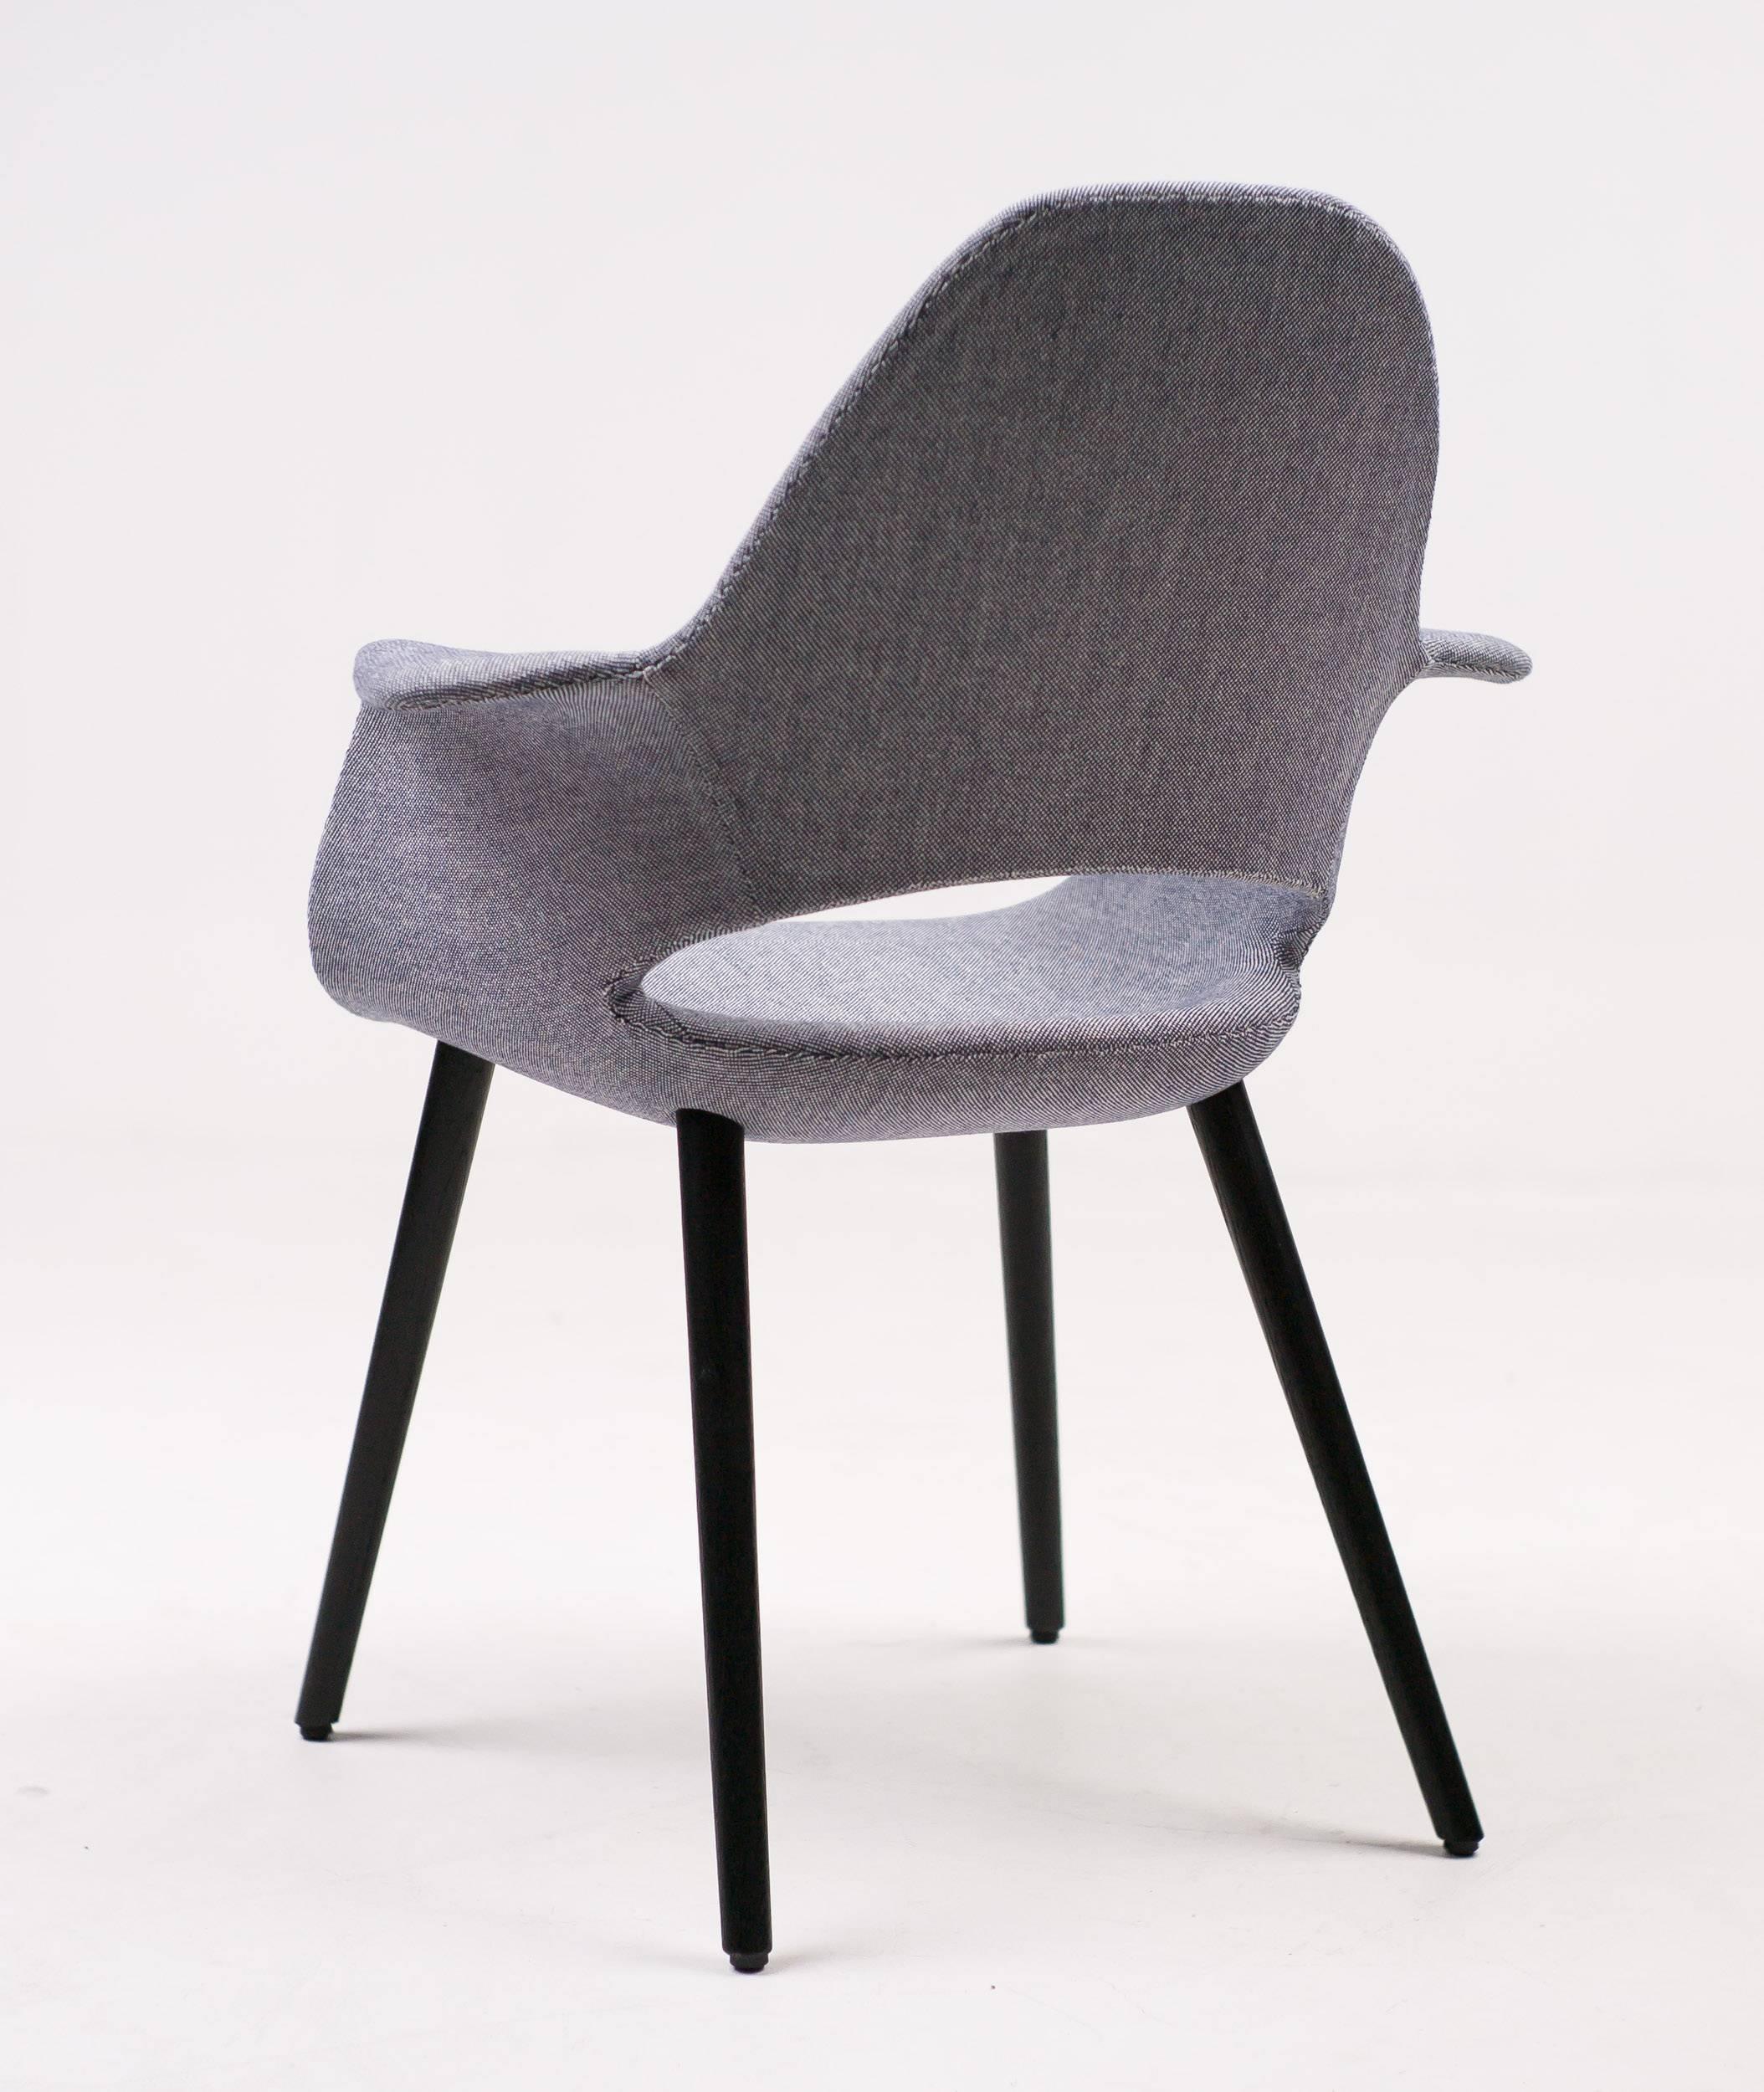 Charles Eames, Eero Saarinen Organic chair, Vitra edition, in dark blue or ivory hopsak with black stained ash legs. Marked with label.
Also known as 